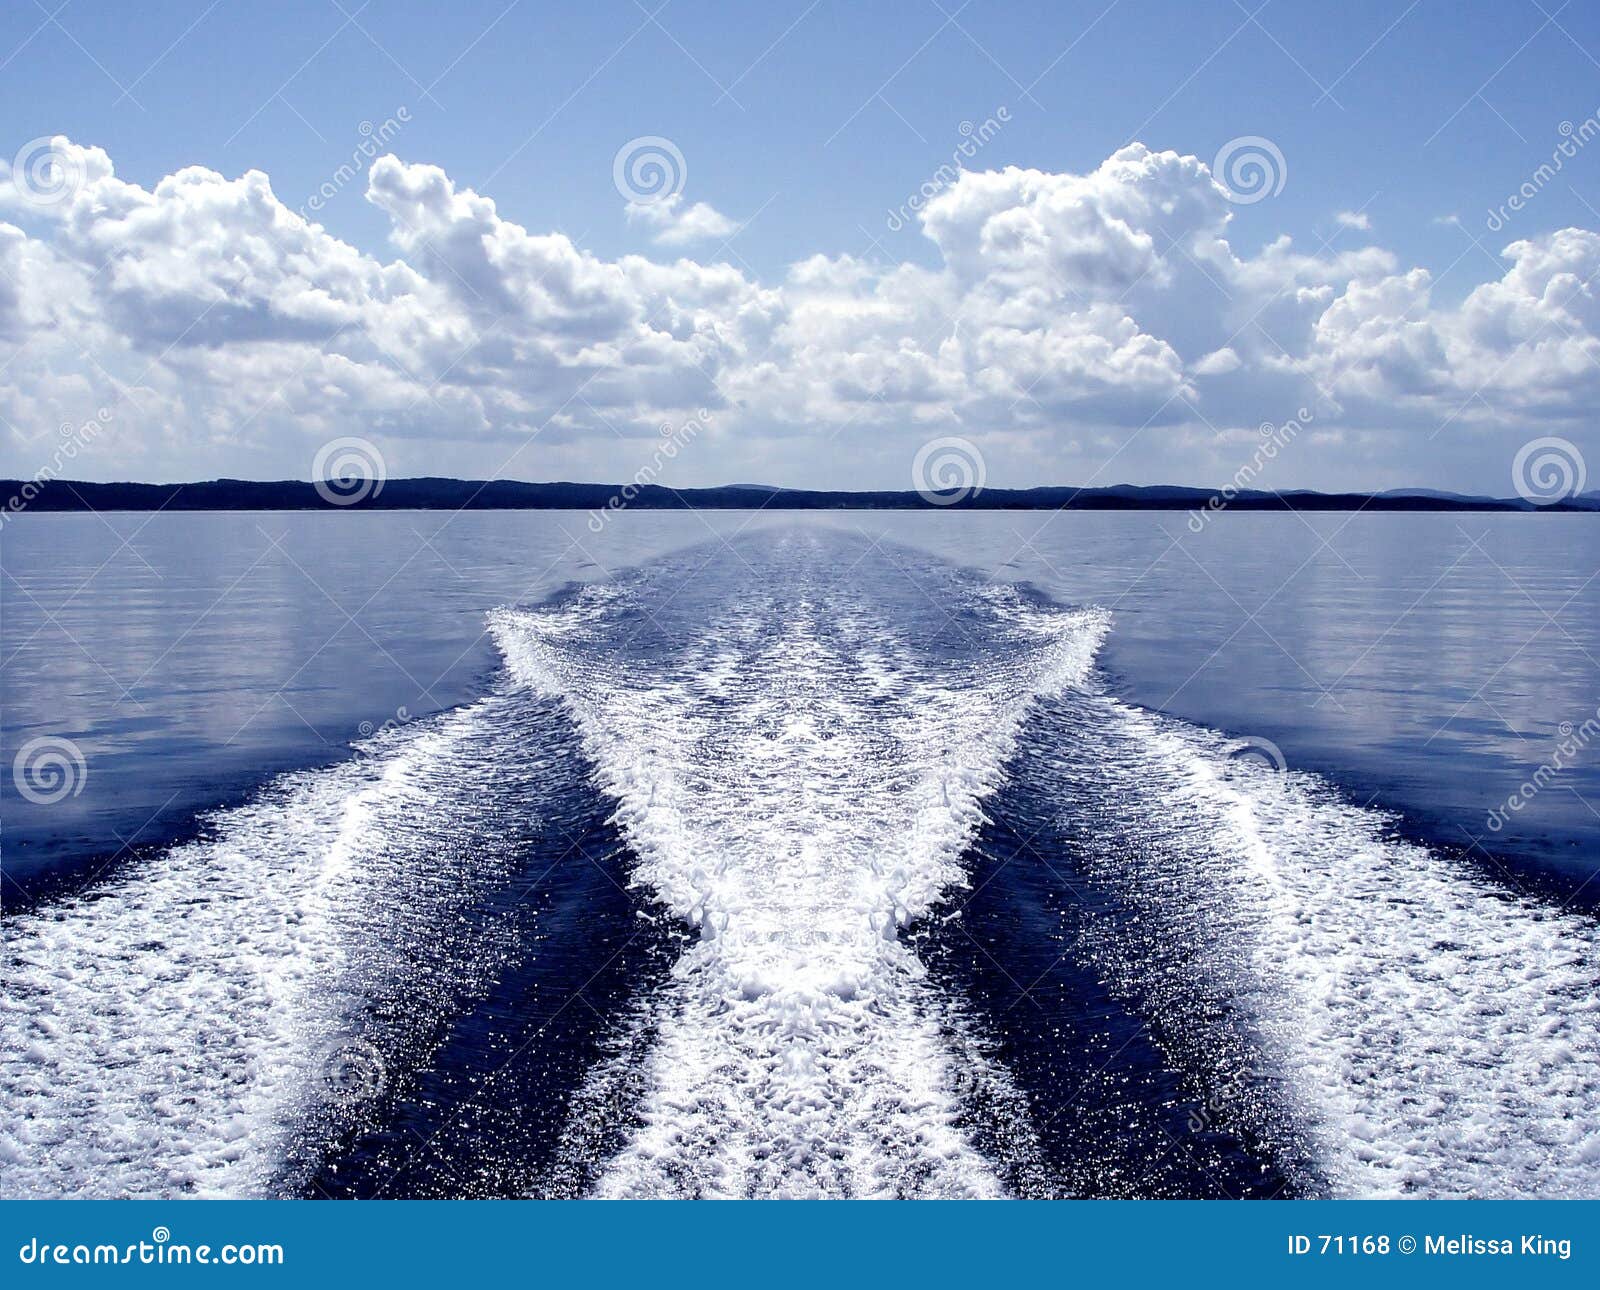 Boat wake stock photo. Image of rural, riding, hills 